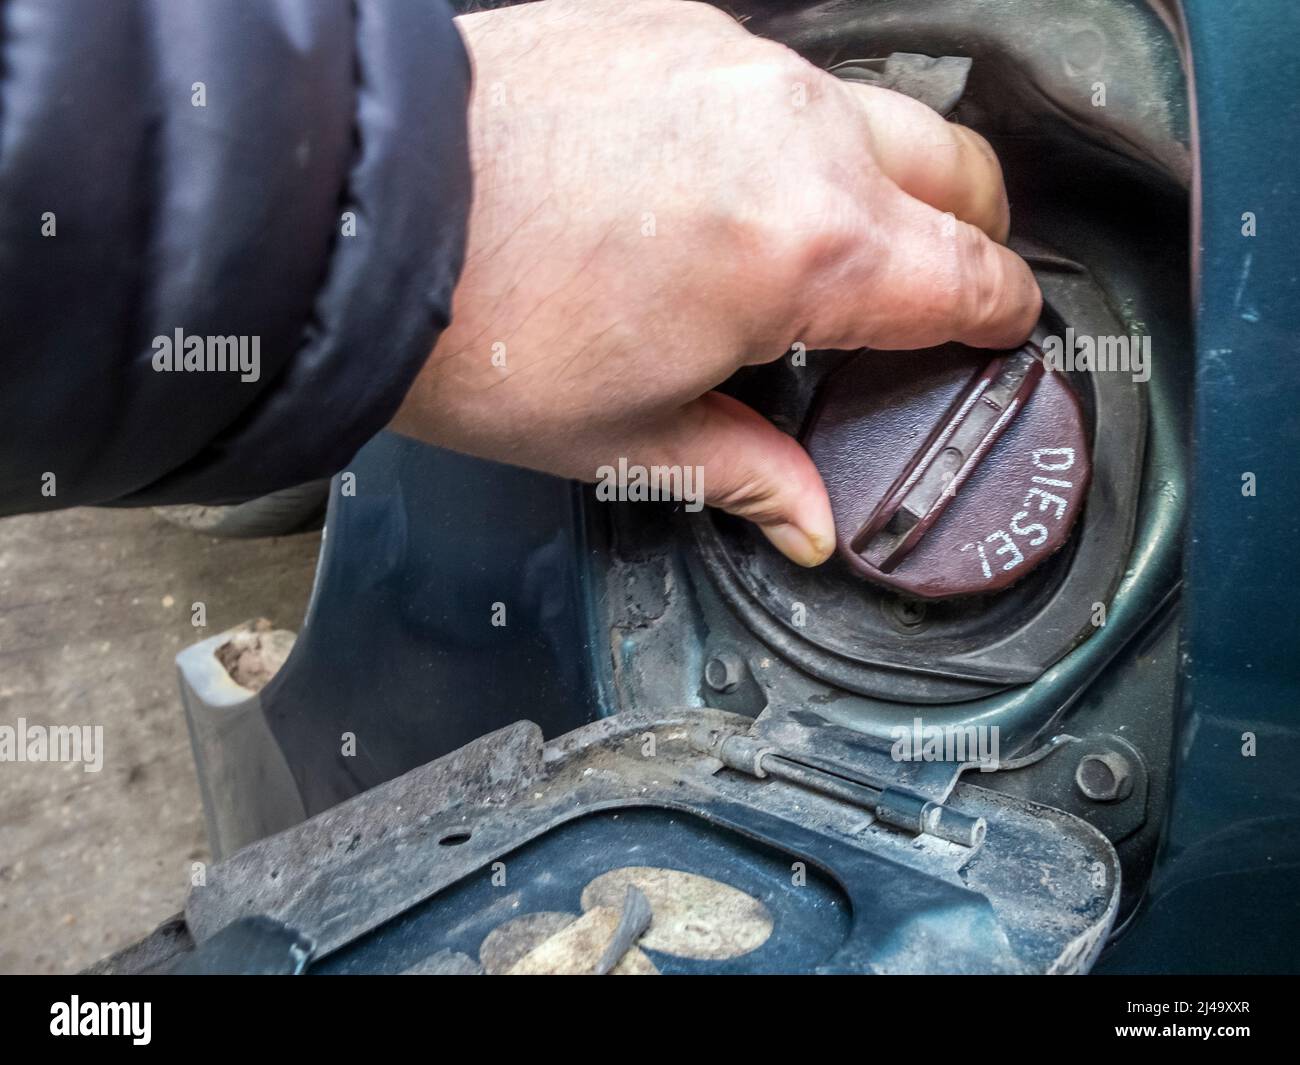 An English petrol filling station customer with an old diesel van,replaces the petrol cap, after buying diesel fuel,screwing the cap back on. Japanese Stock Photo